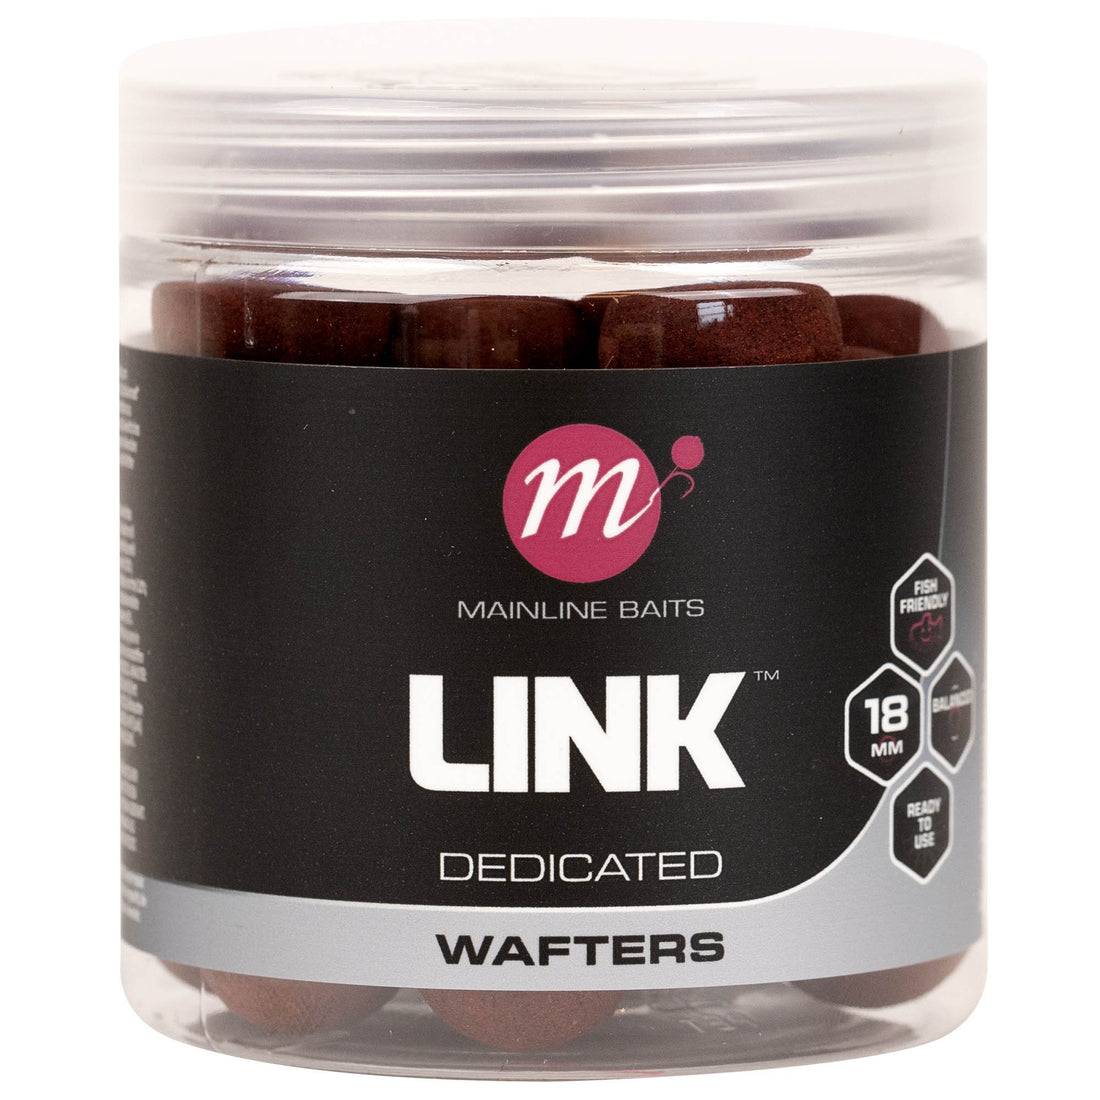 Mainline Balanced Wafters The Link 18mm